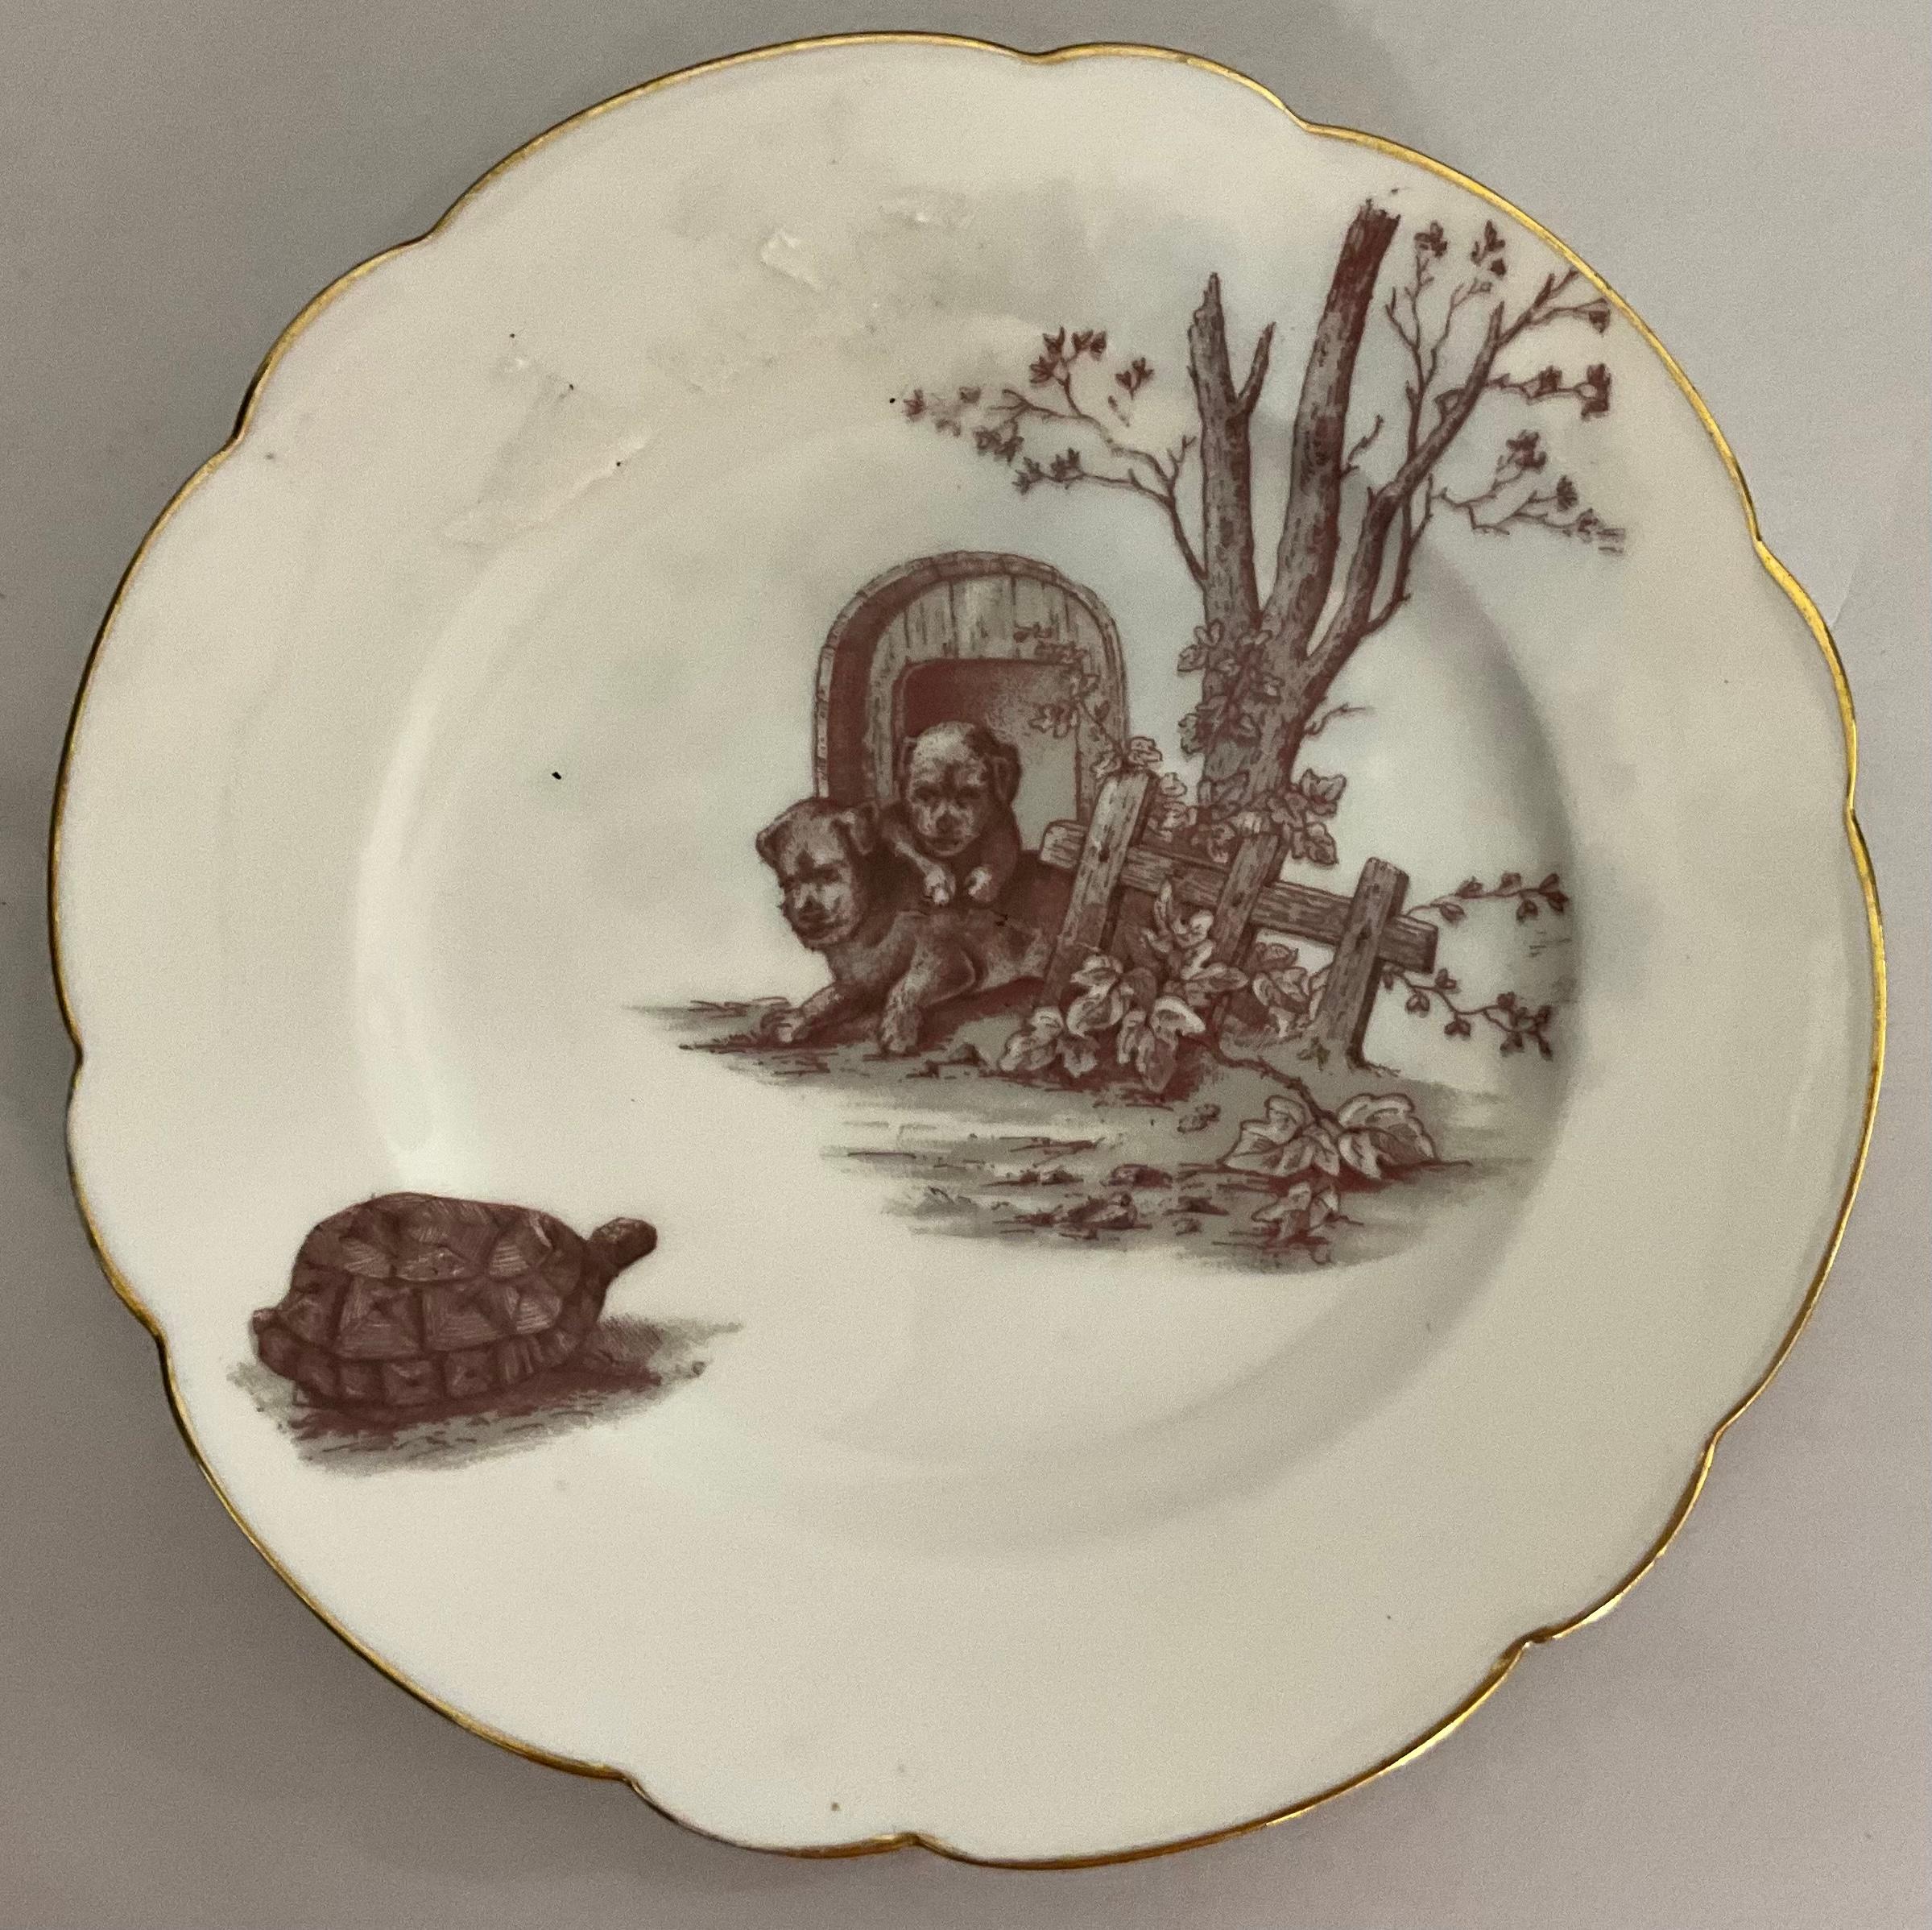 Aesthetic Movement 19th-Century Set of 8 French Limoges Dessert Plates, Rabbits, Birds, Puppies For Sale